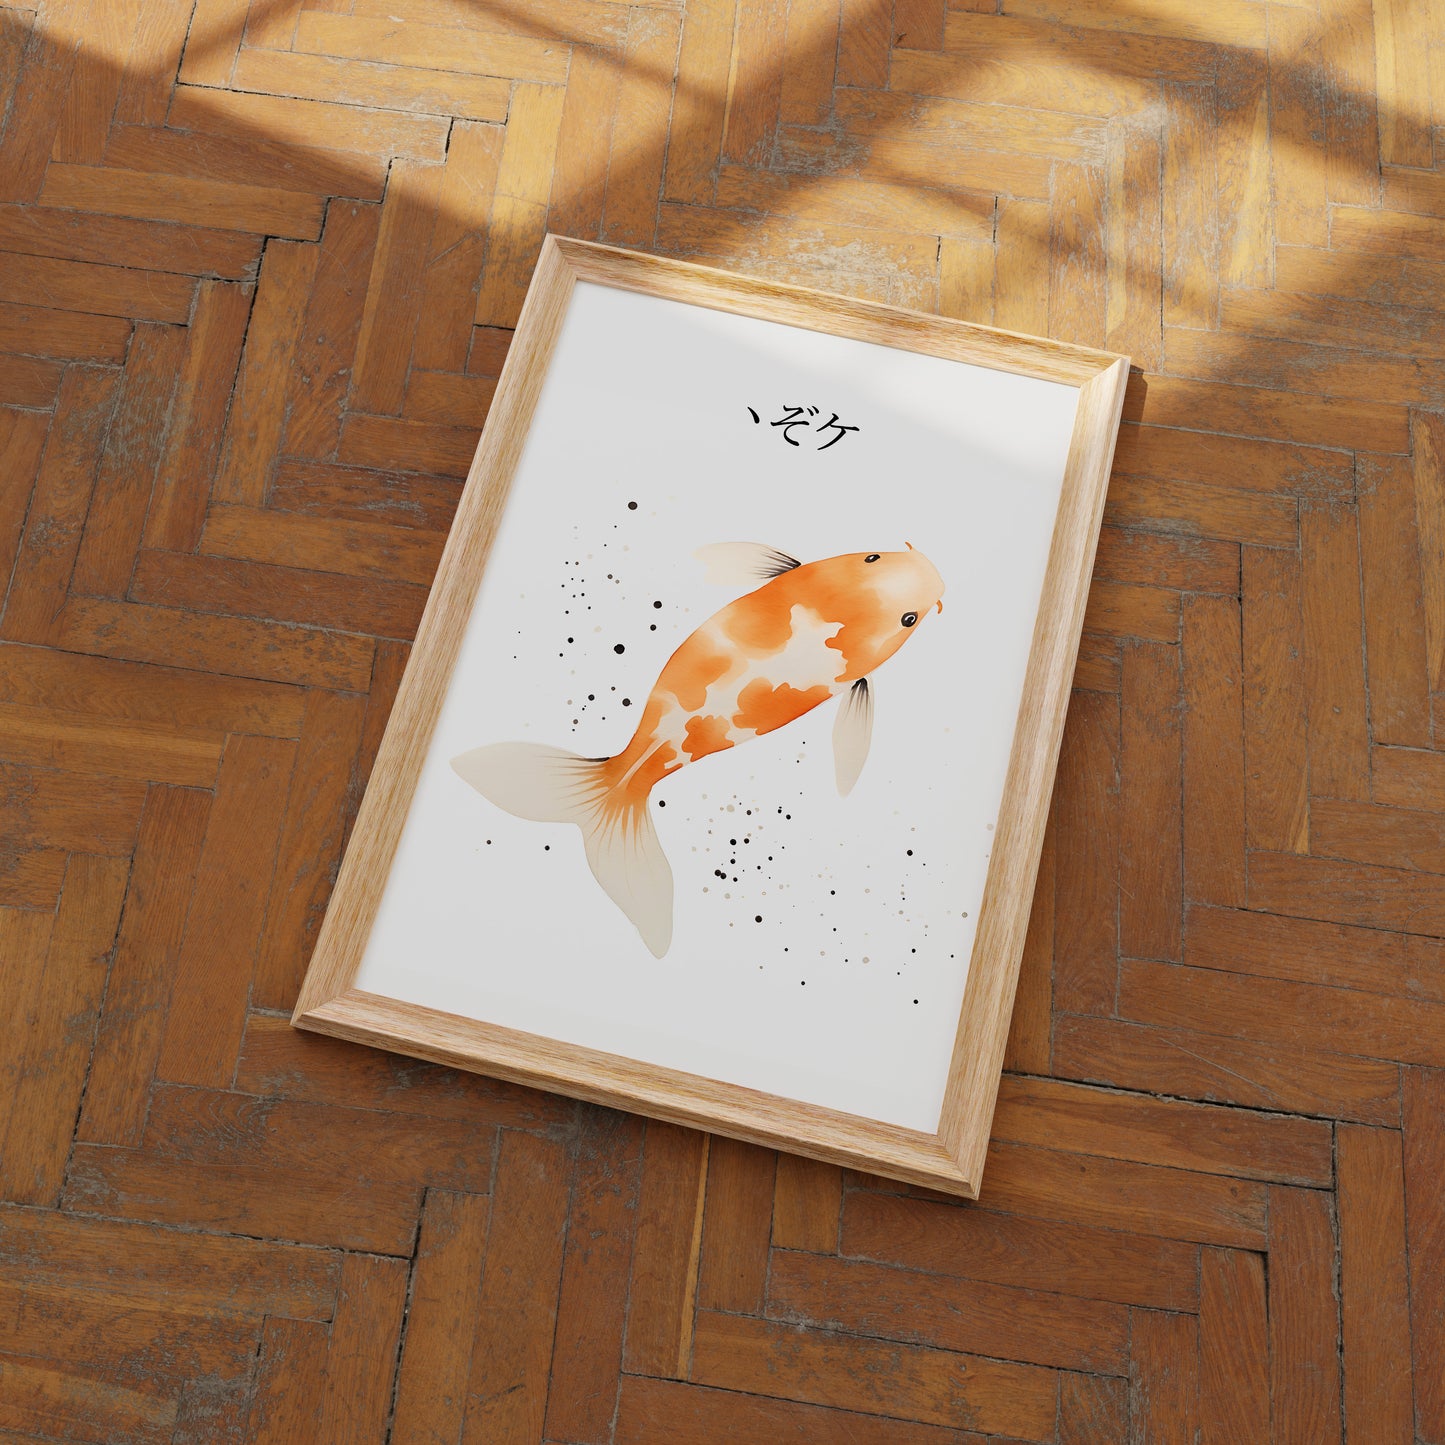 A framed illustration of an orange and white koi fish on a wooden floor.